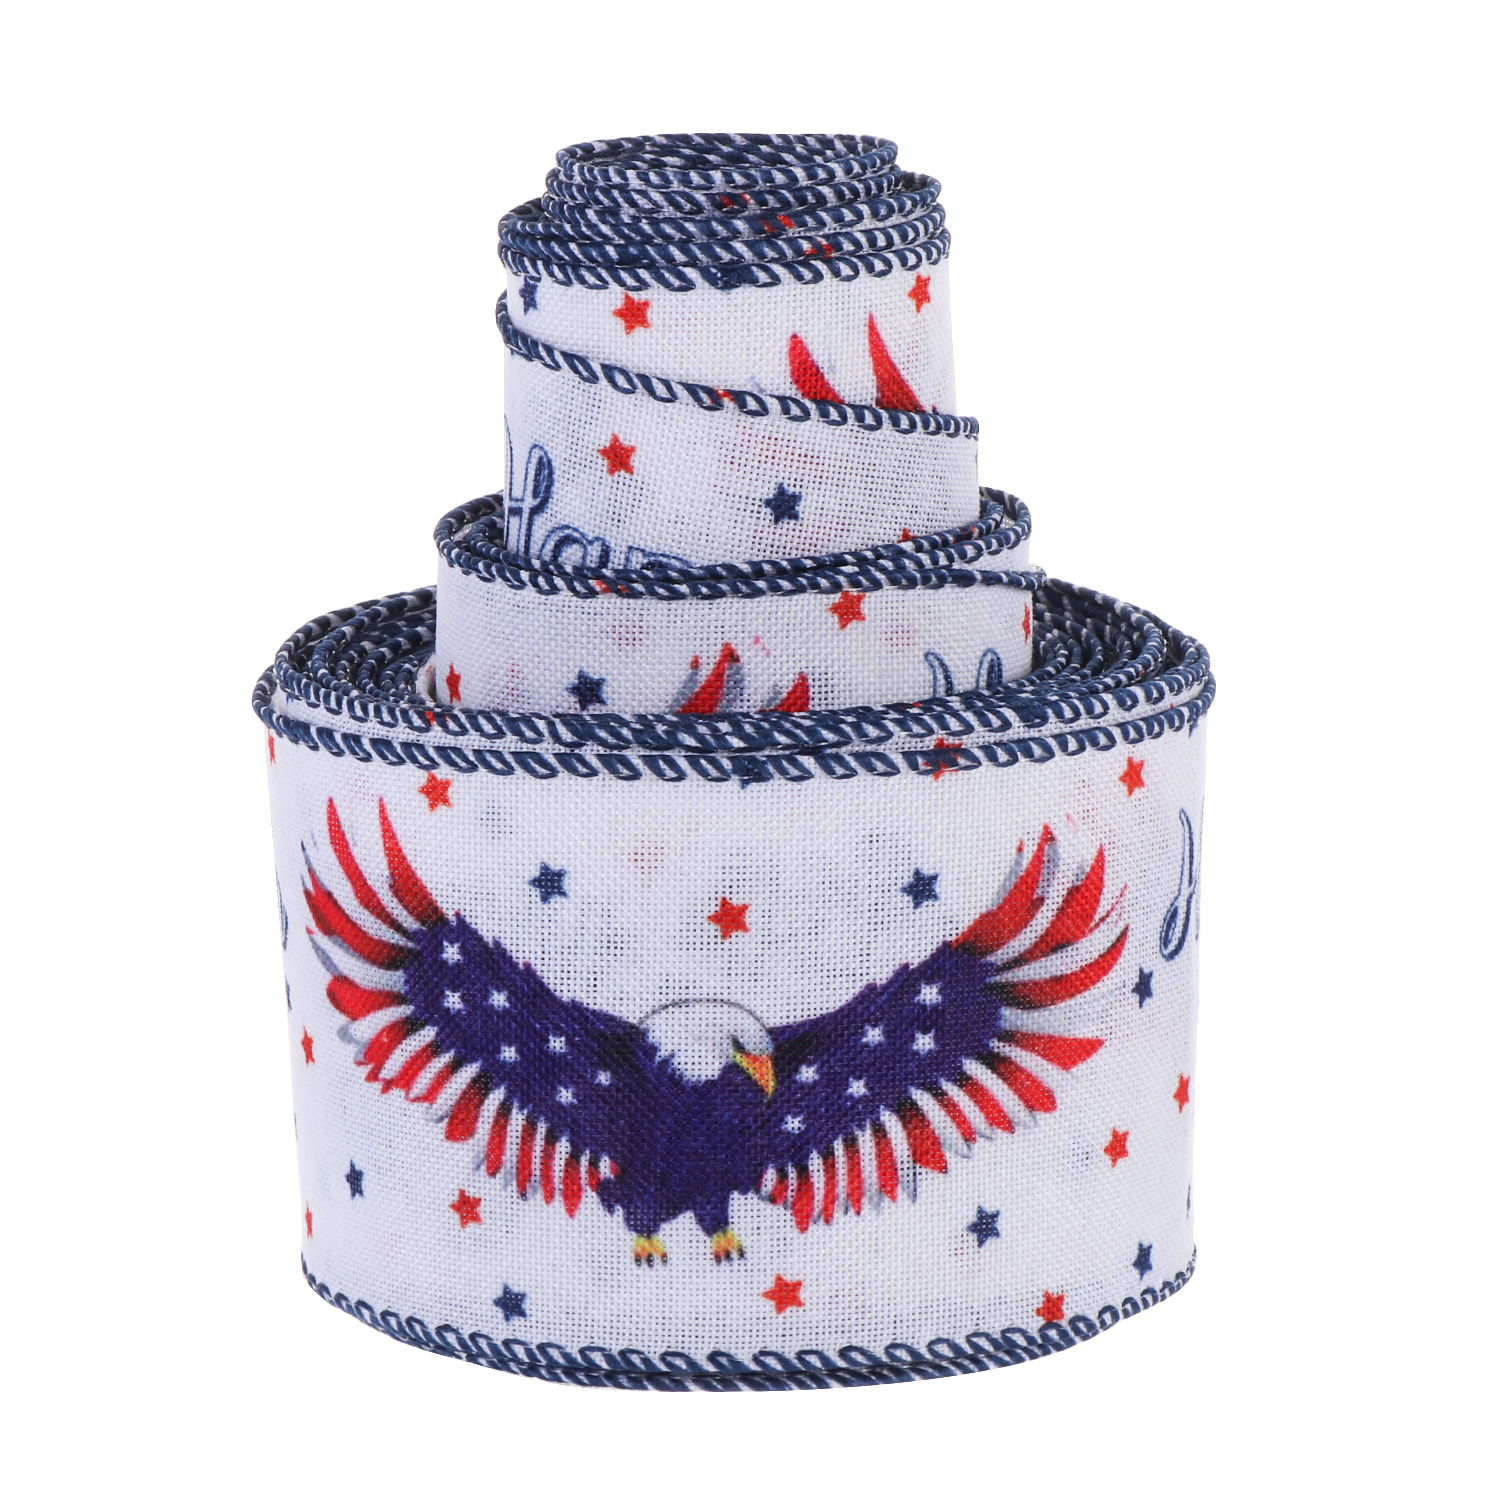 MIOSHOP New Independence Day Crafts Accessories Holiday Decoration Color Ribbon Card Decor Star Gift Wrapping Bows DIY Red Blue White Party Supplies Cake wrapping Ribbon